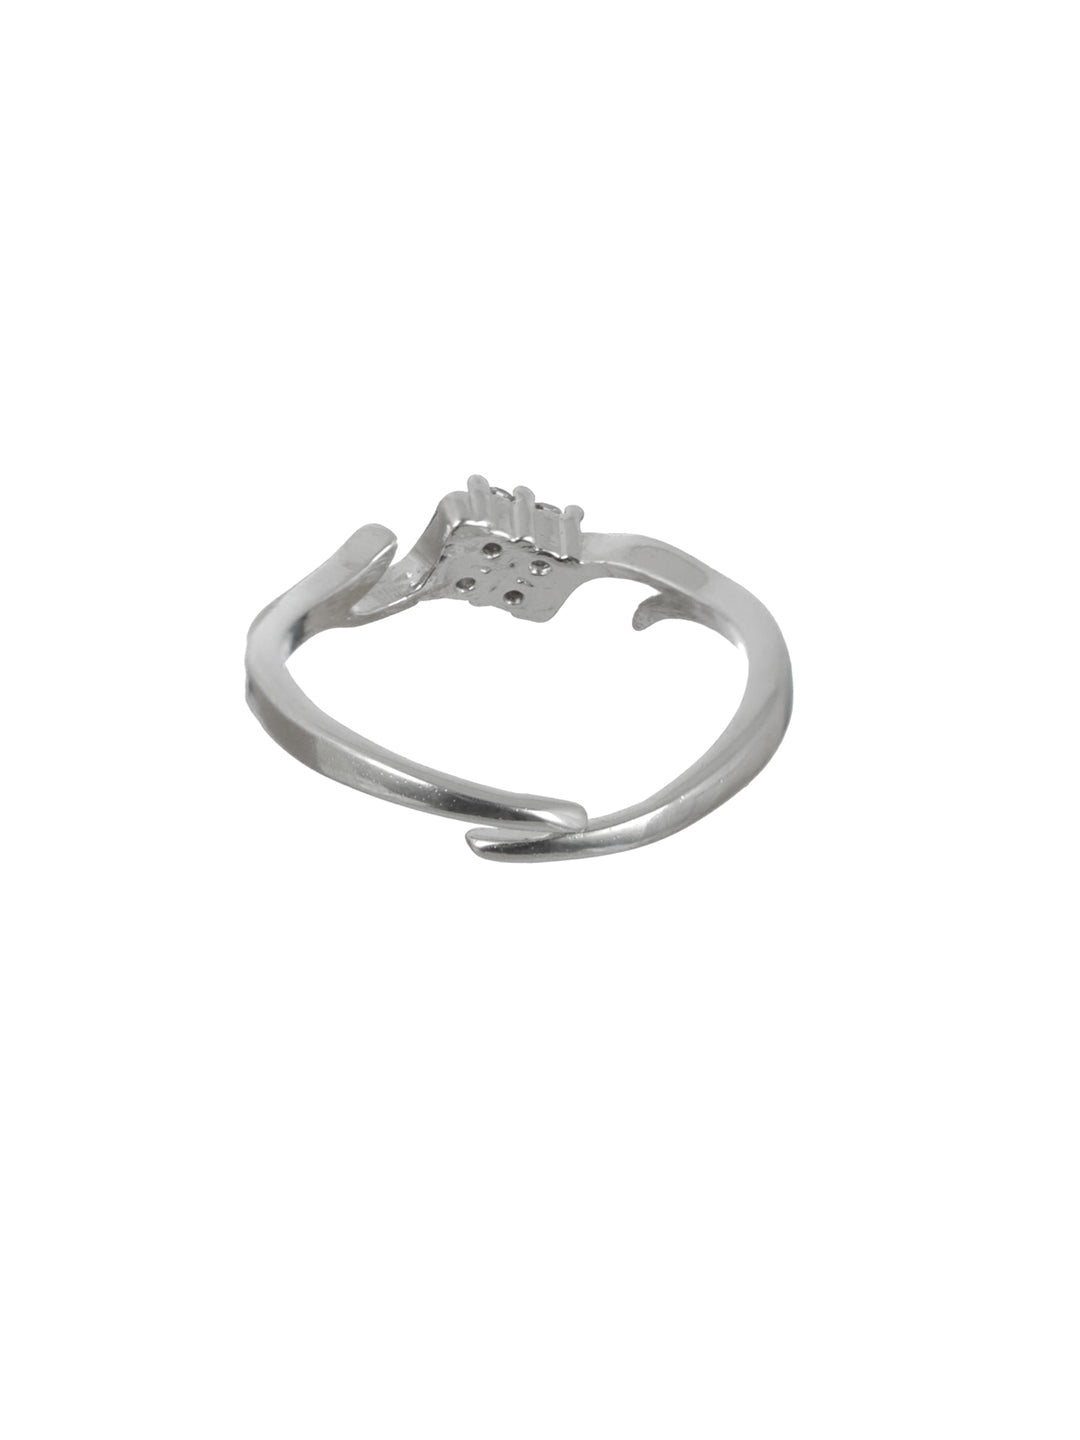 Floral American Diamond Sterling Silver Ring